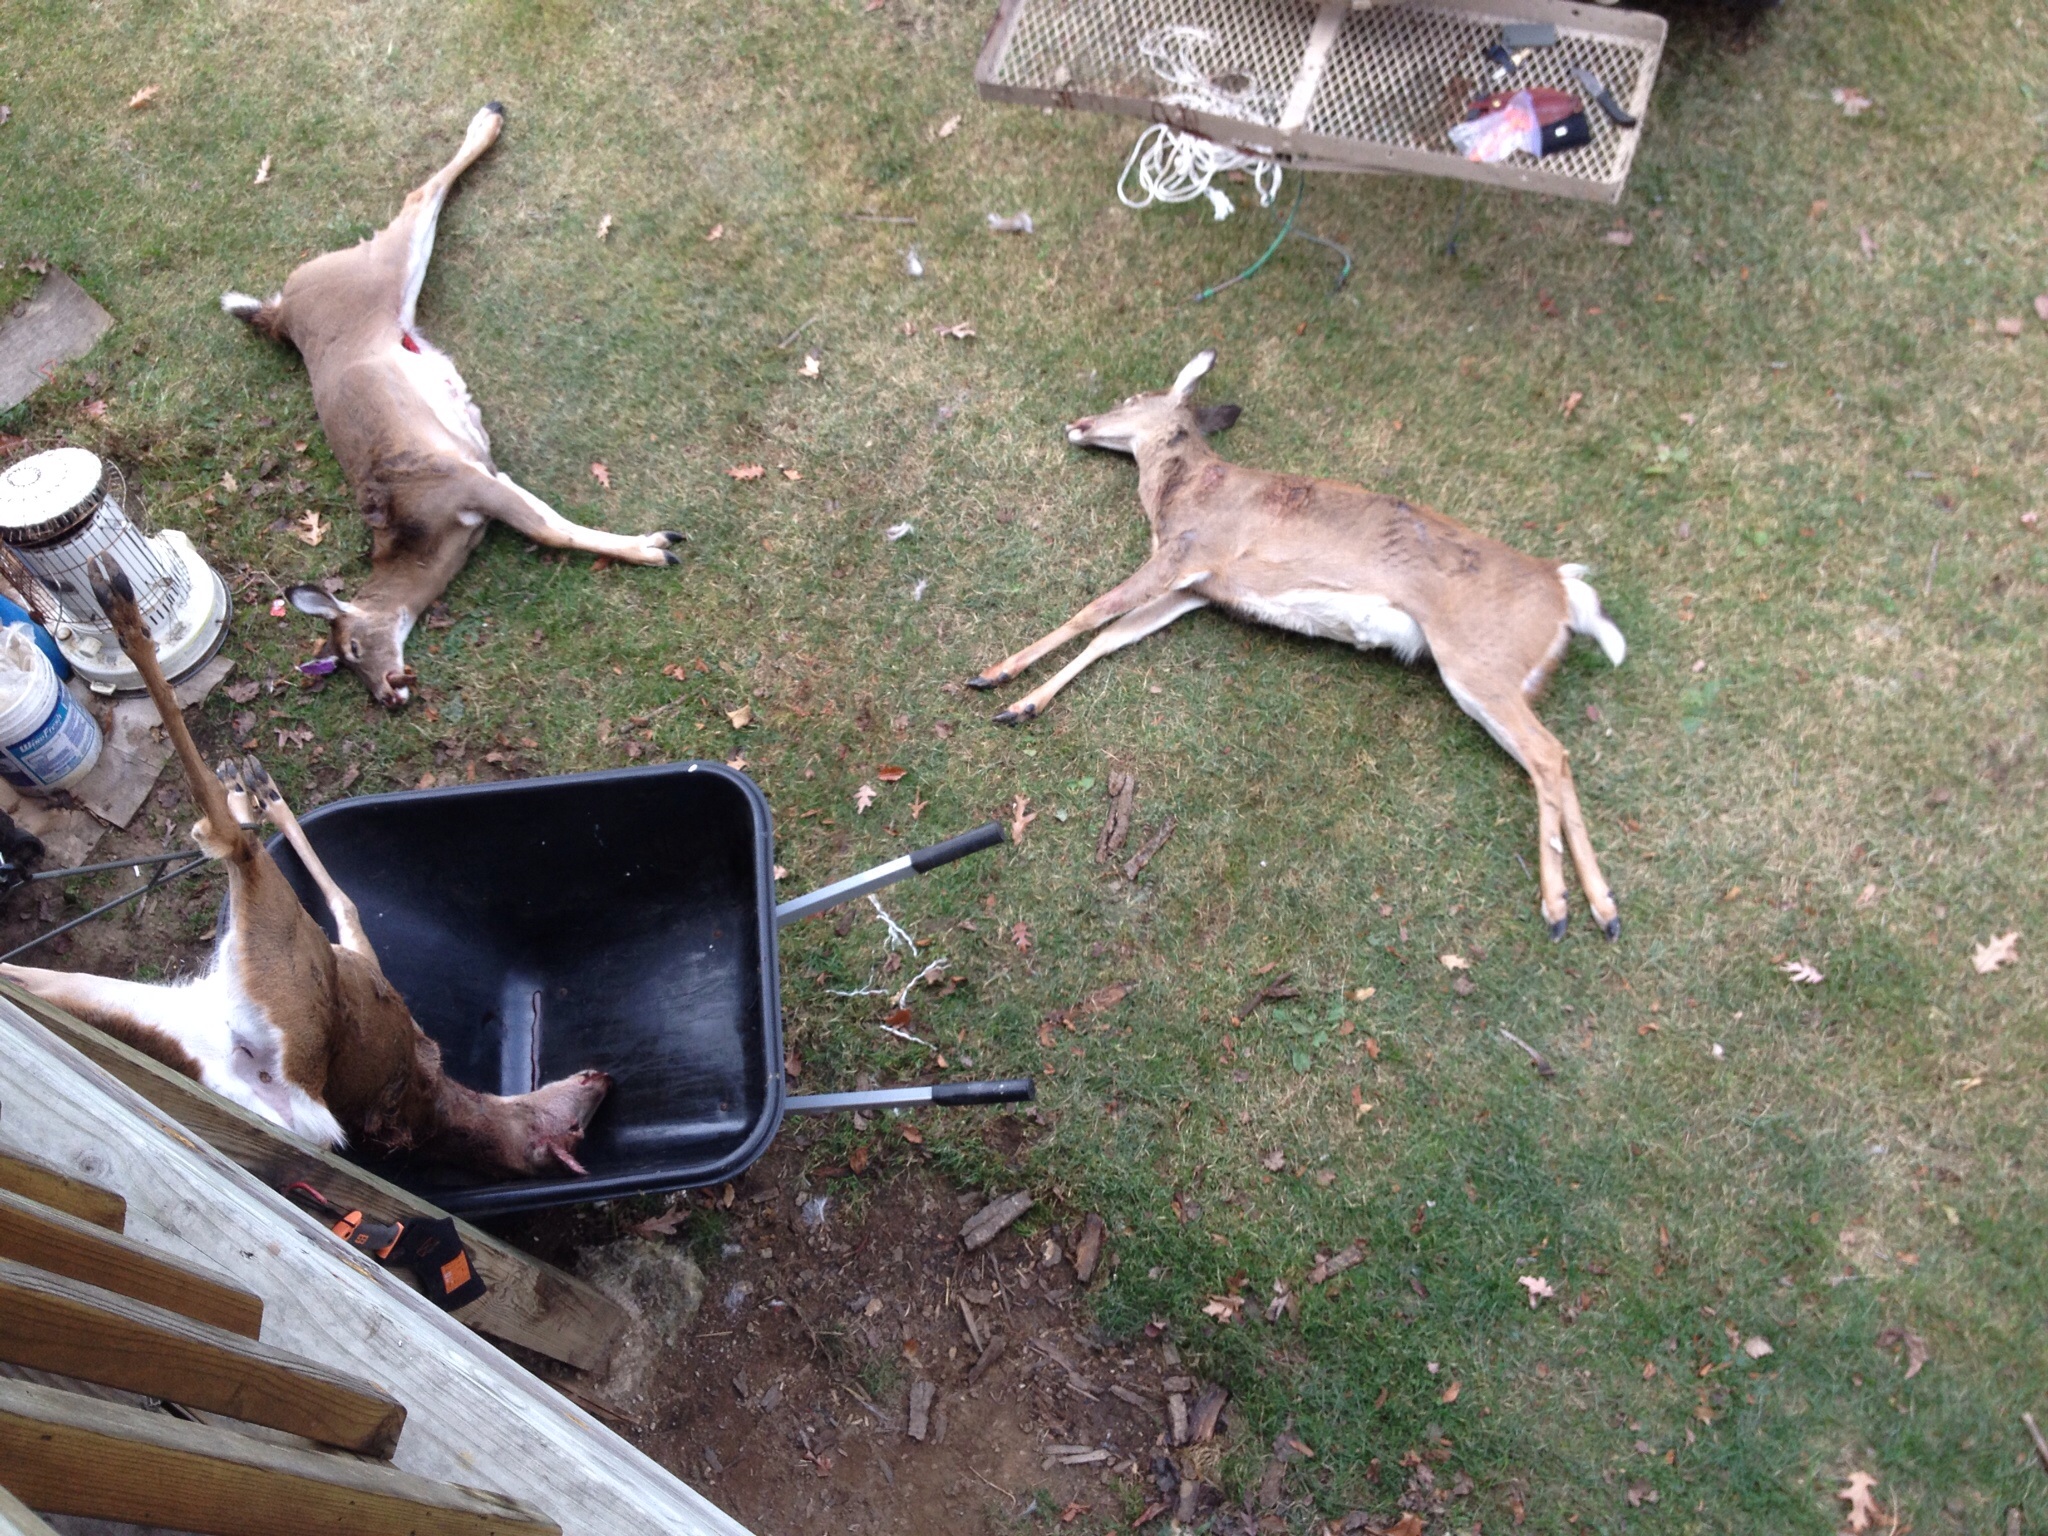 16 Nov 13. DH's deer from opening day & day after.